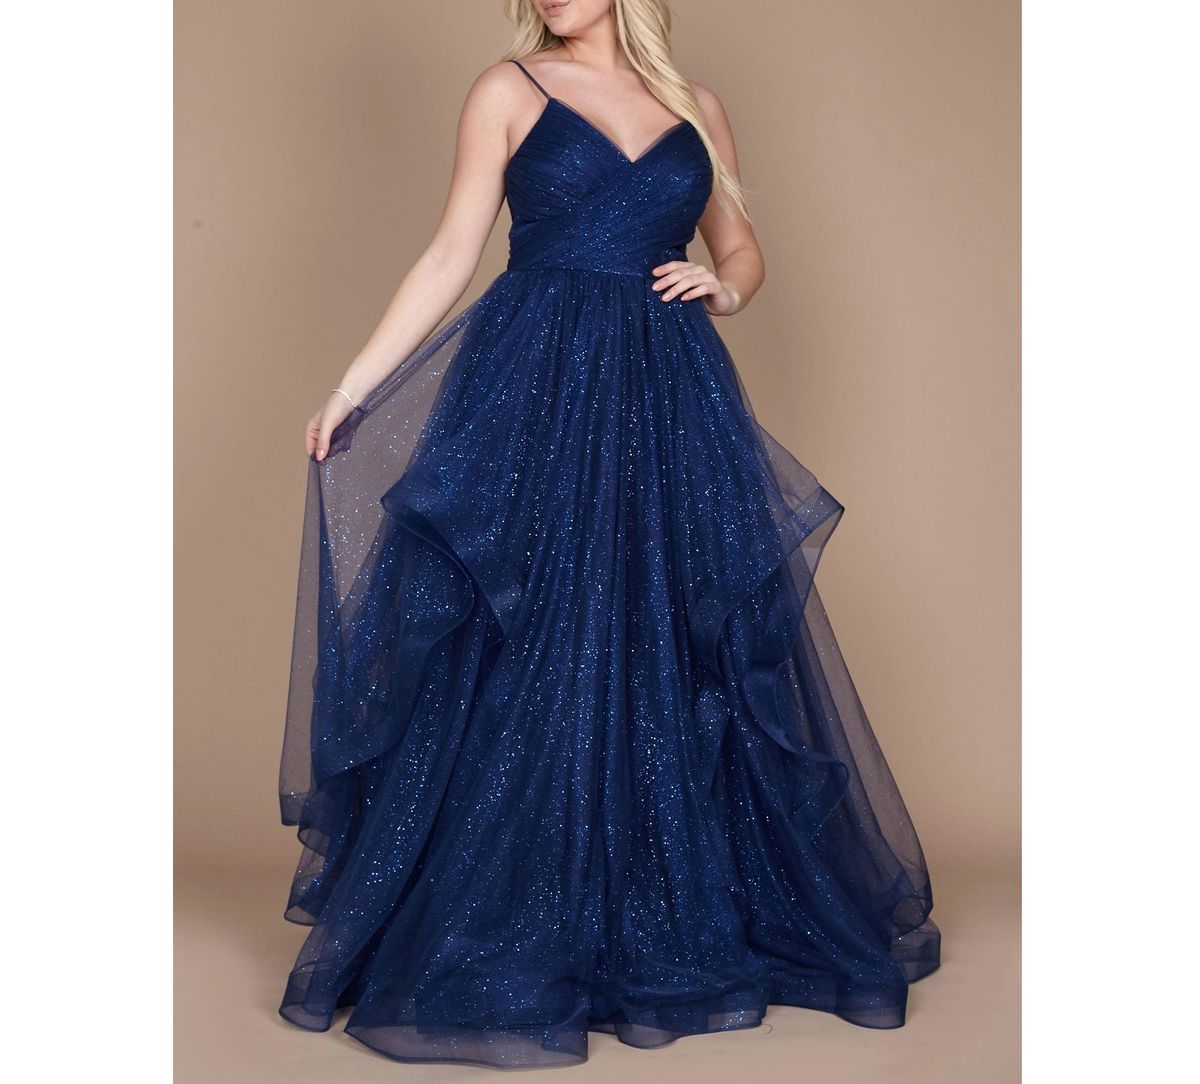 Style Navy Blue Sparkle Glitter Tulle Ruffle A-line Formal Ball Gown Dylan & David  Plus Size 16 Blue Ball Gown on Queenly